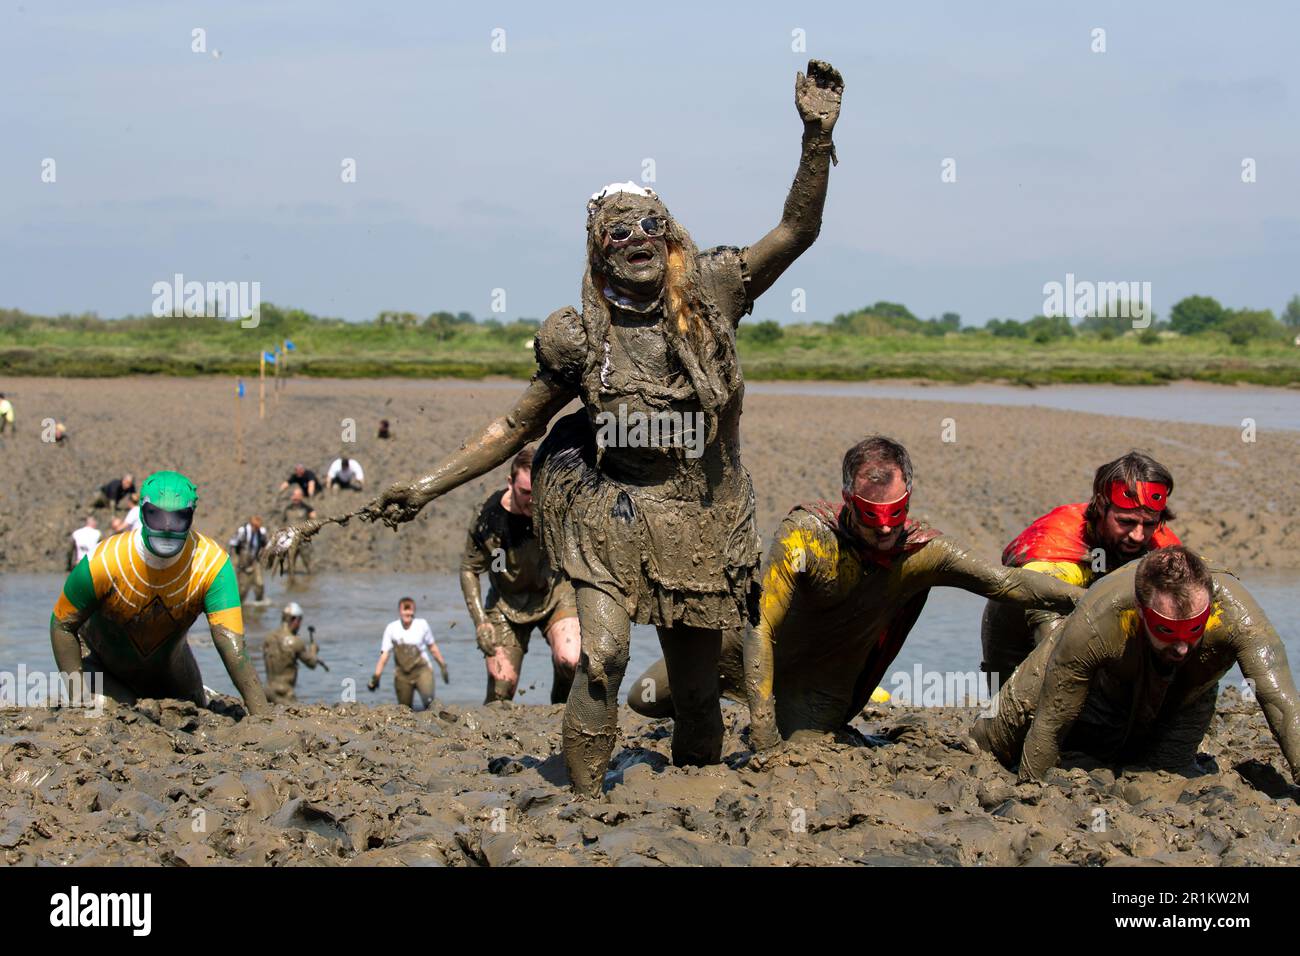 Maldon, Essex, UK. 14th May 2023. Competitors take part in the Maldon Mud Race, The mud race consists of a 500 meters dash across the River Blackwater and dates back to 1973. Credit: Lucy North/Alamy Live News Stock Photo